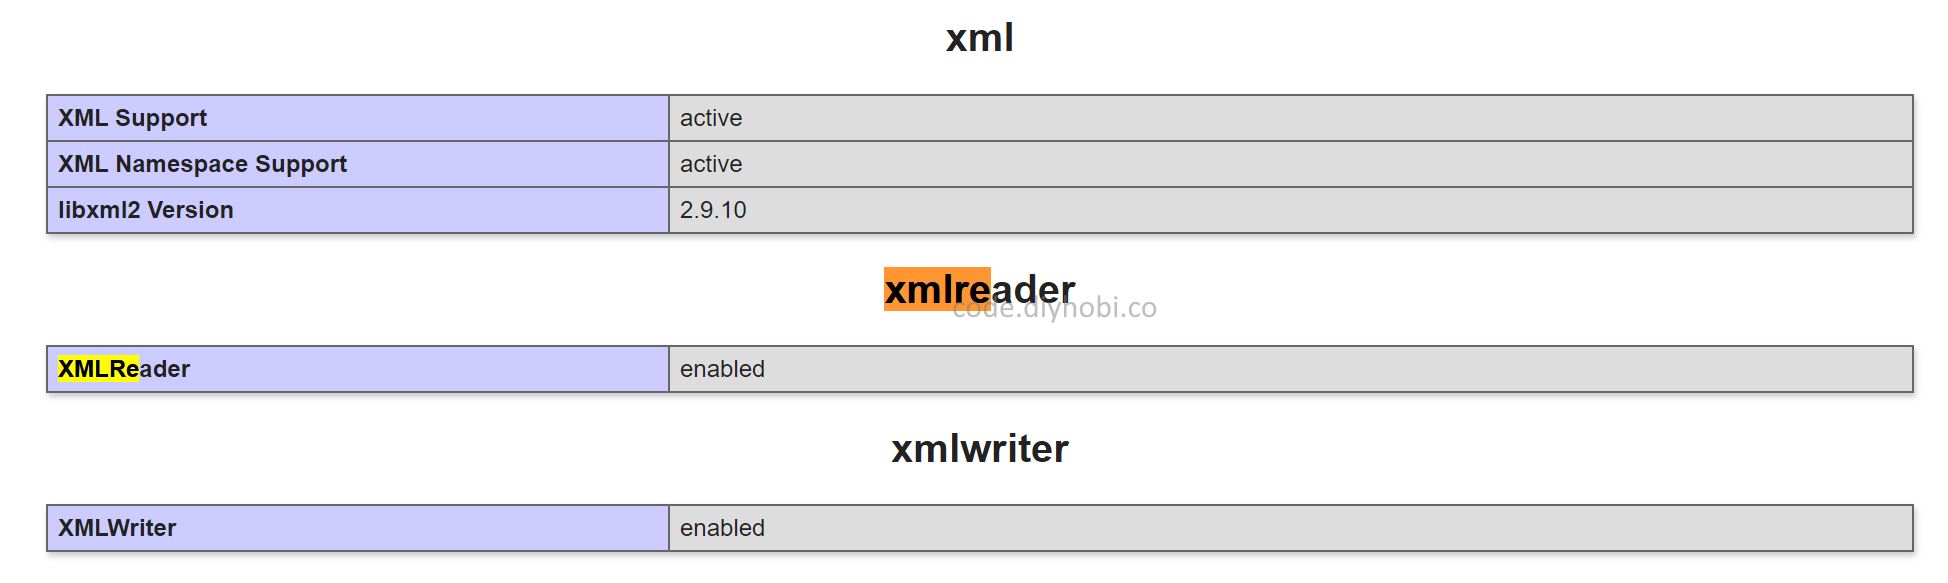 Required Xmlreader Php Extension Is Missing On Your Server | Diy Code